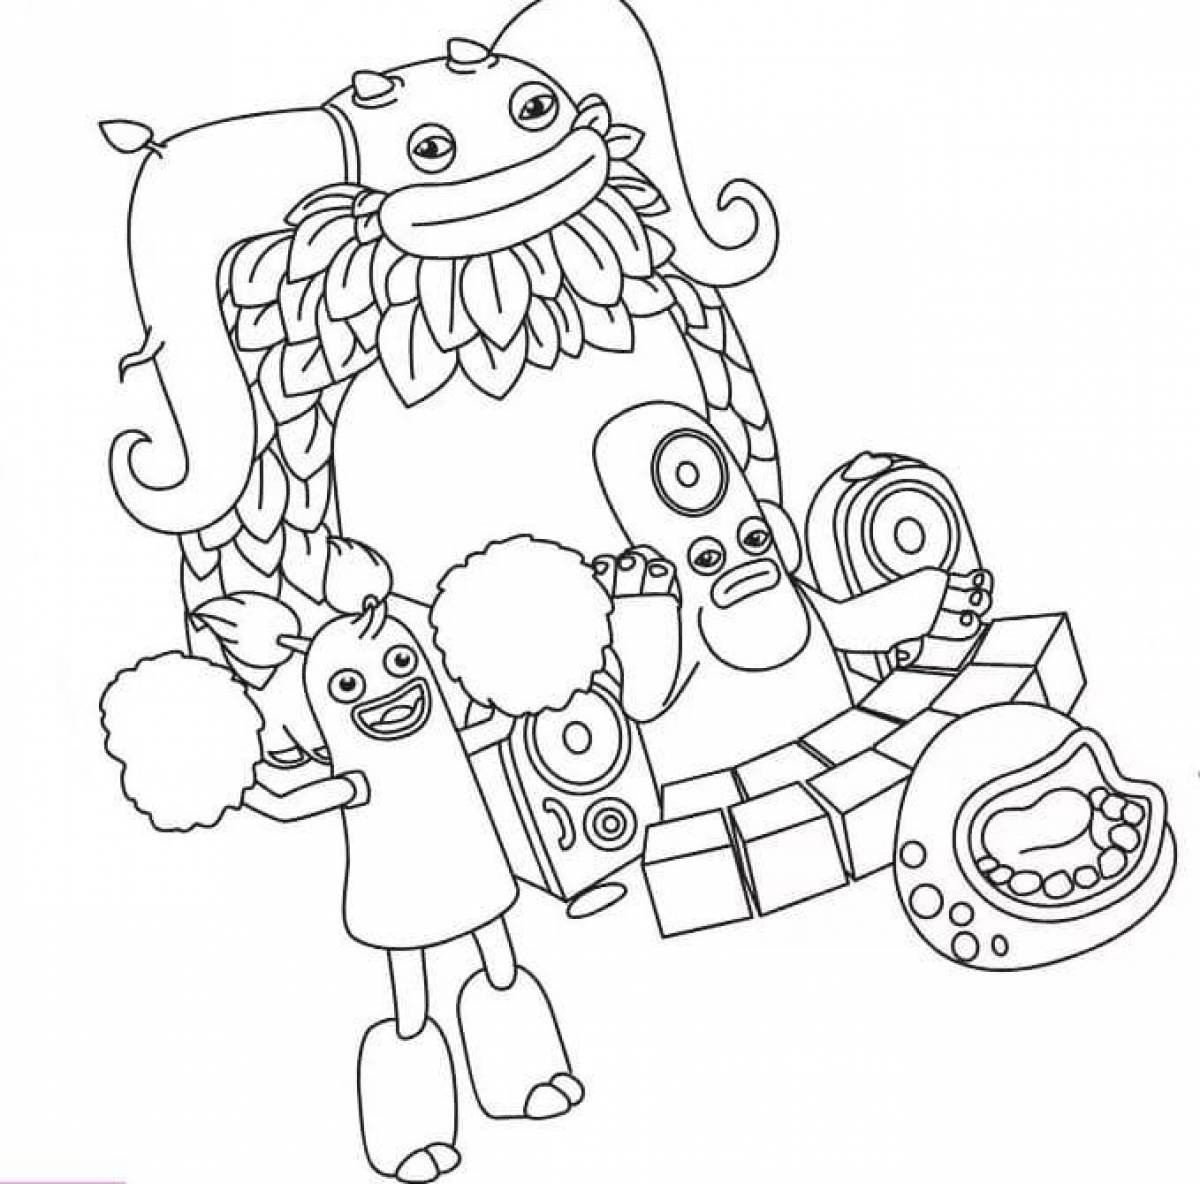 Adorable singing monsters coloring page